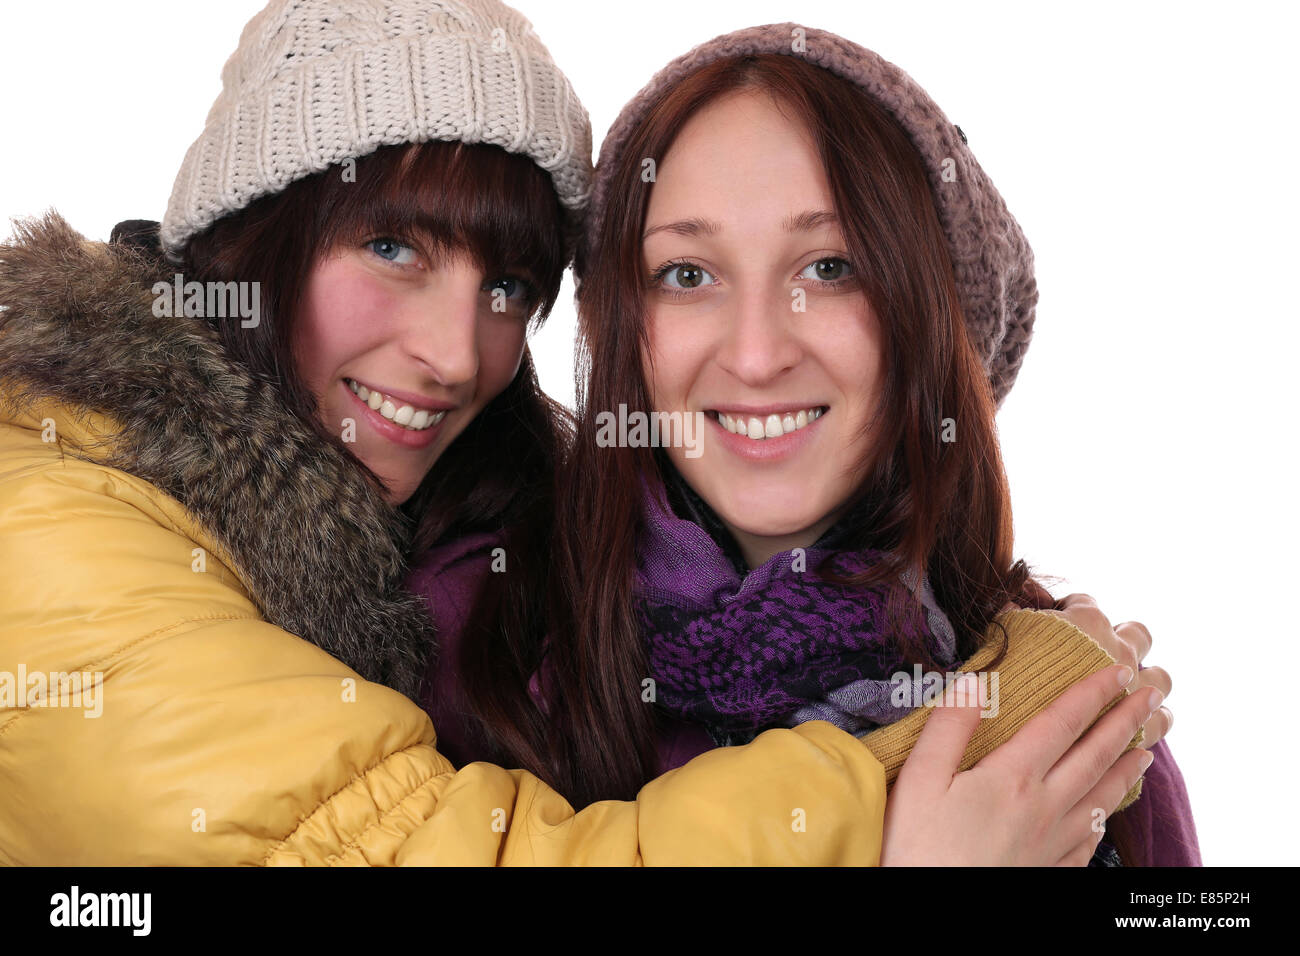 Two smiling women in winter clothing hug each other, isolated on a white background Stock Photo